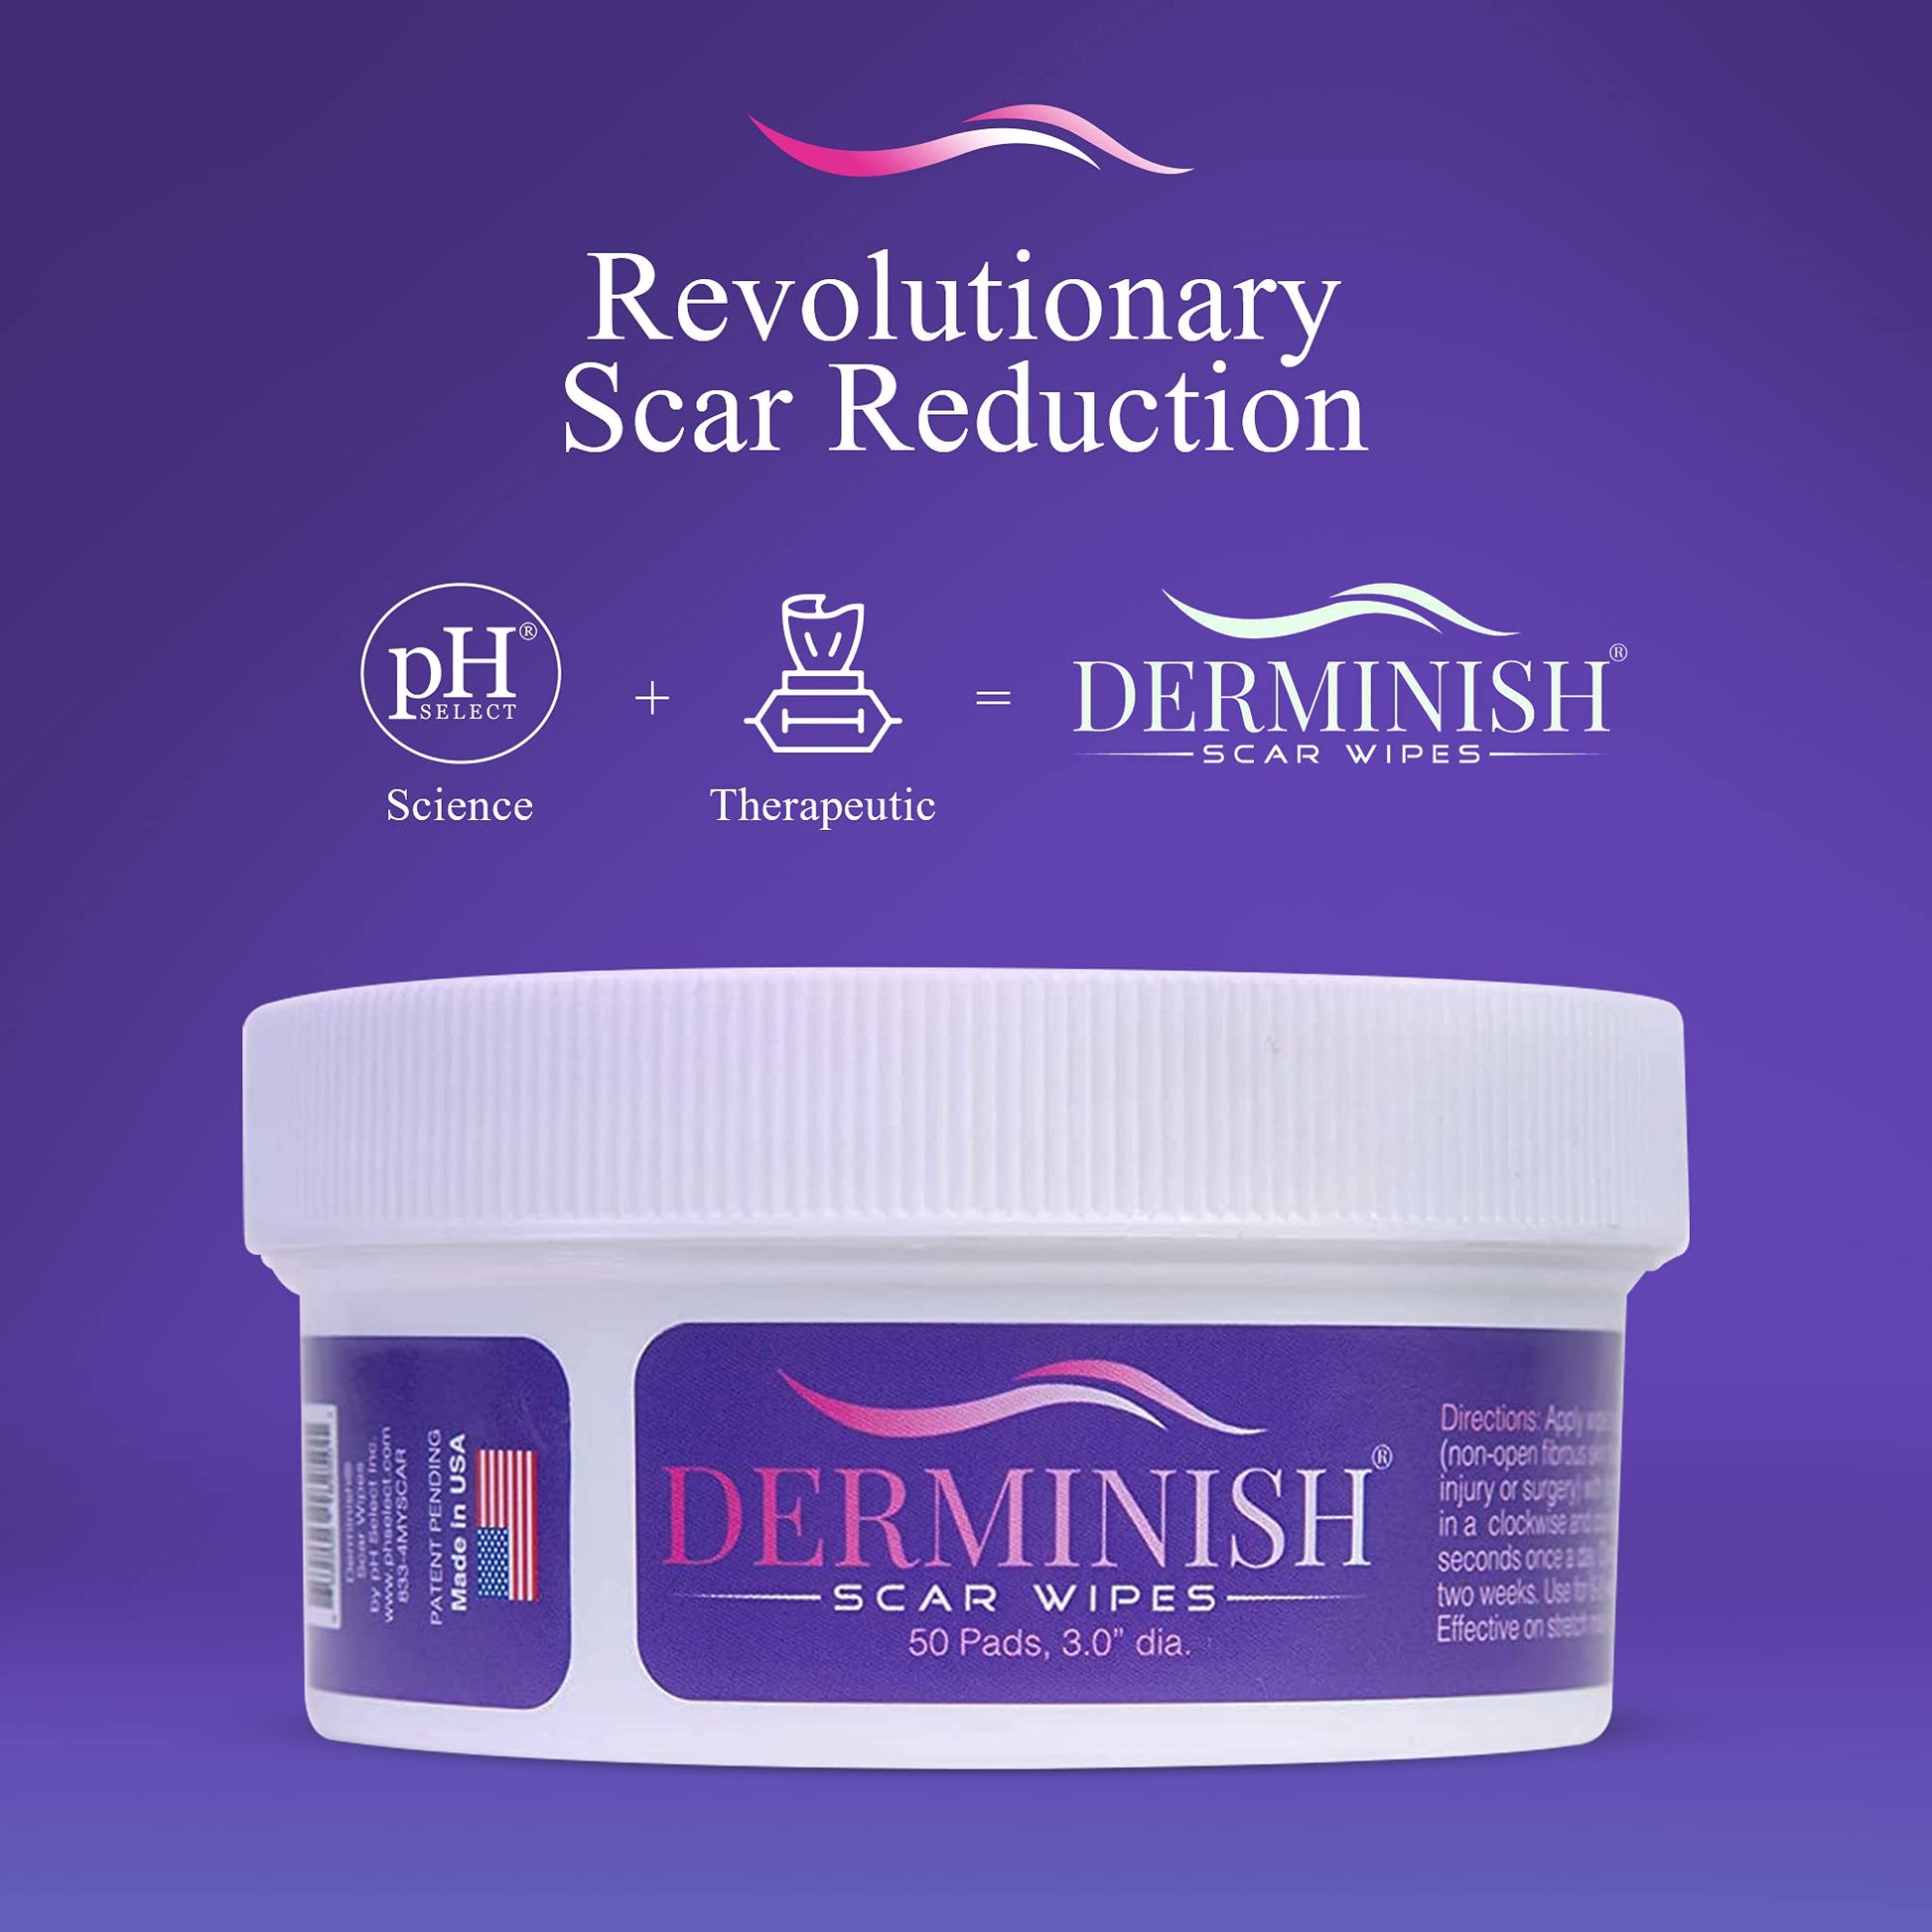 Revolutionary Scar Reduction: Science + Therapeutic = Derminish Scar Wipes